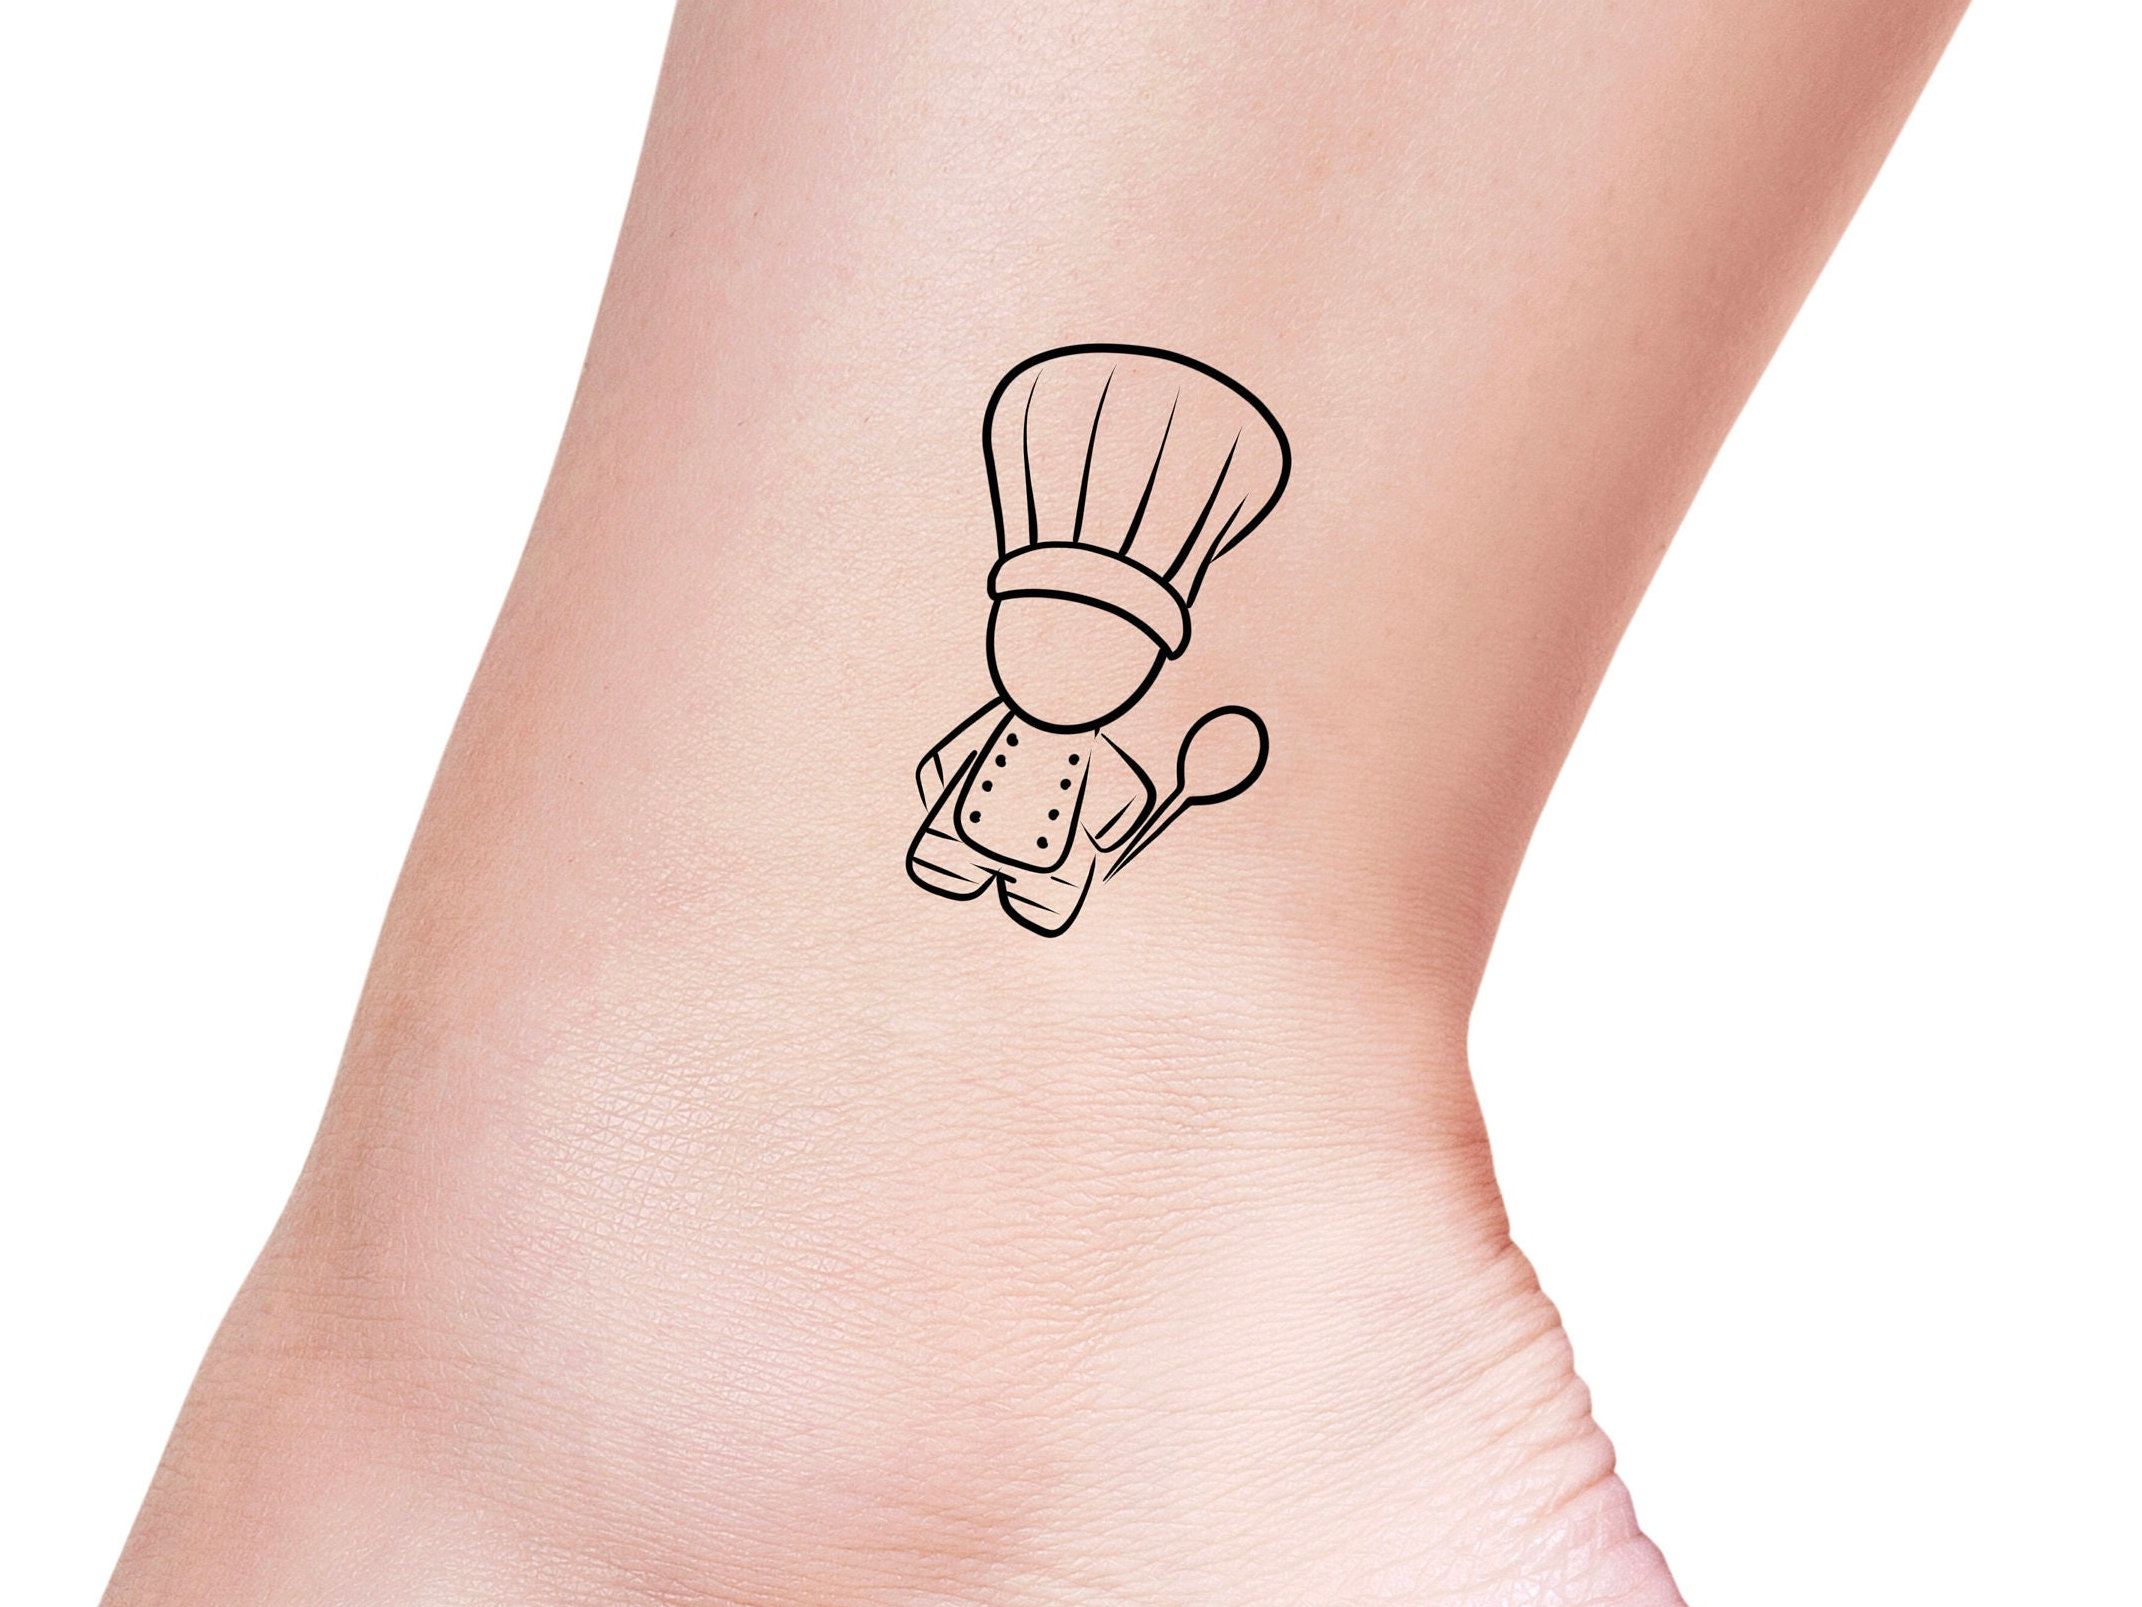 Details more than 78 culinary art chef tattoo designs latest  thtantai2